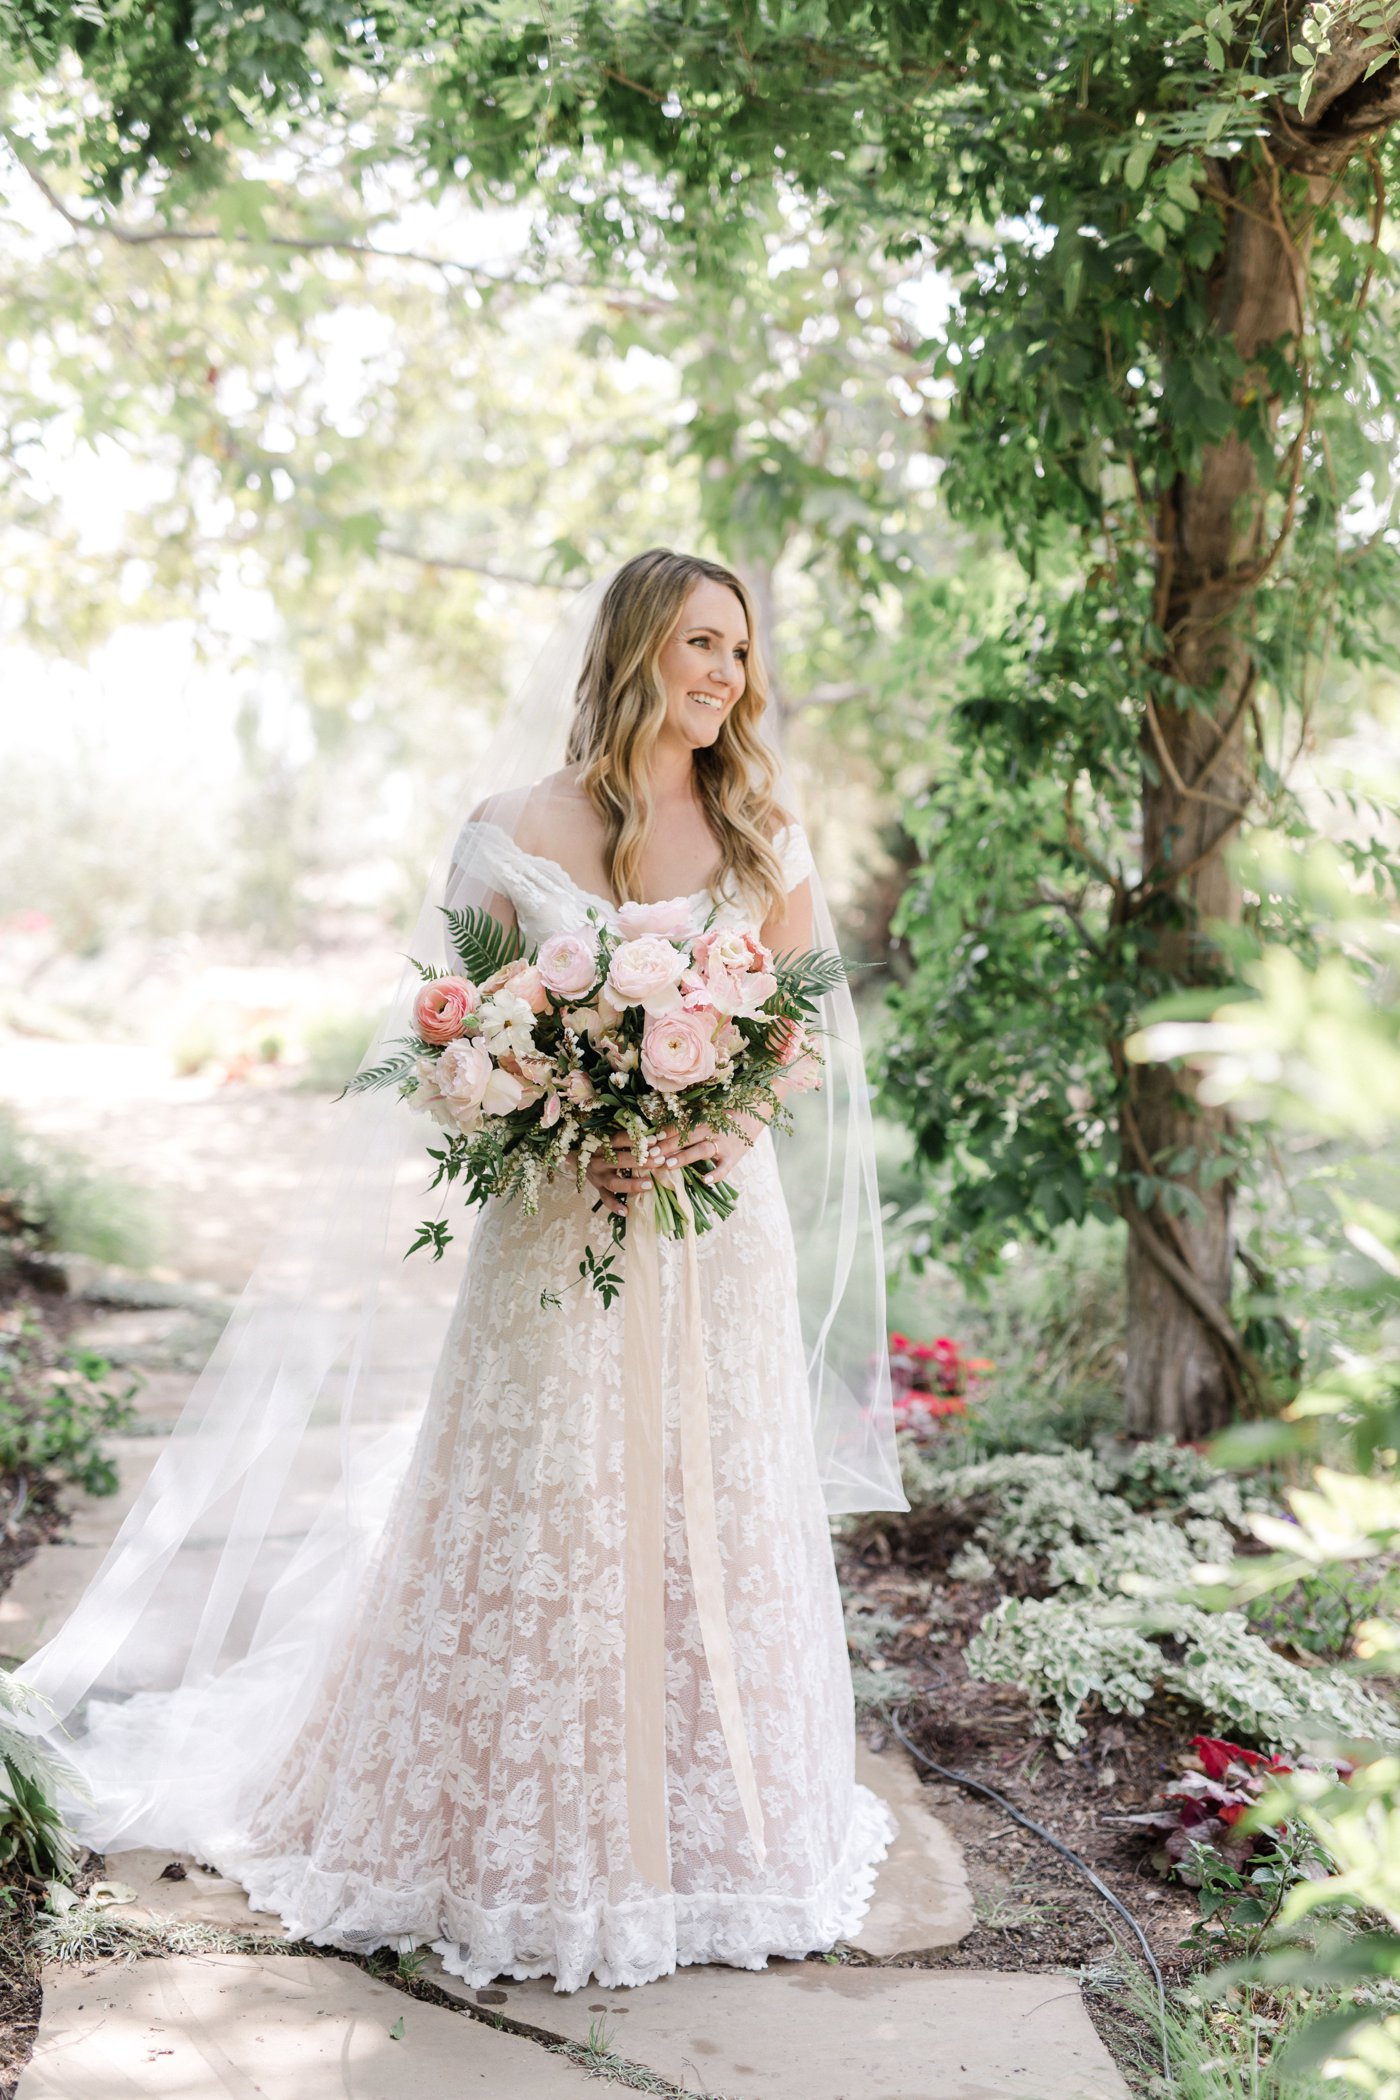 The Beautiful Bride Standing With the Bouquet of Flowers | The Wedding Standard